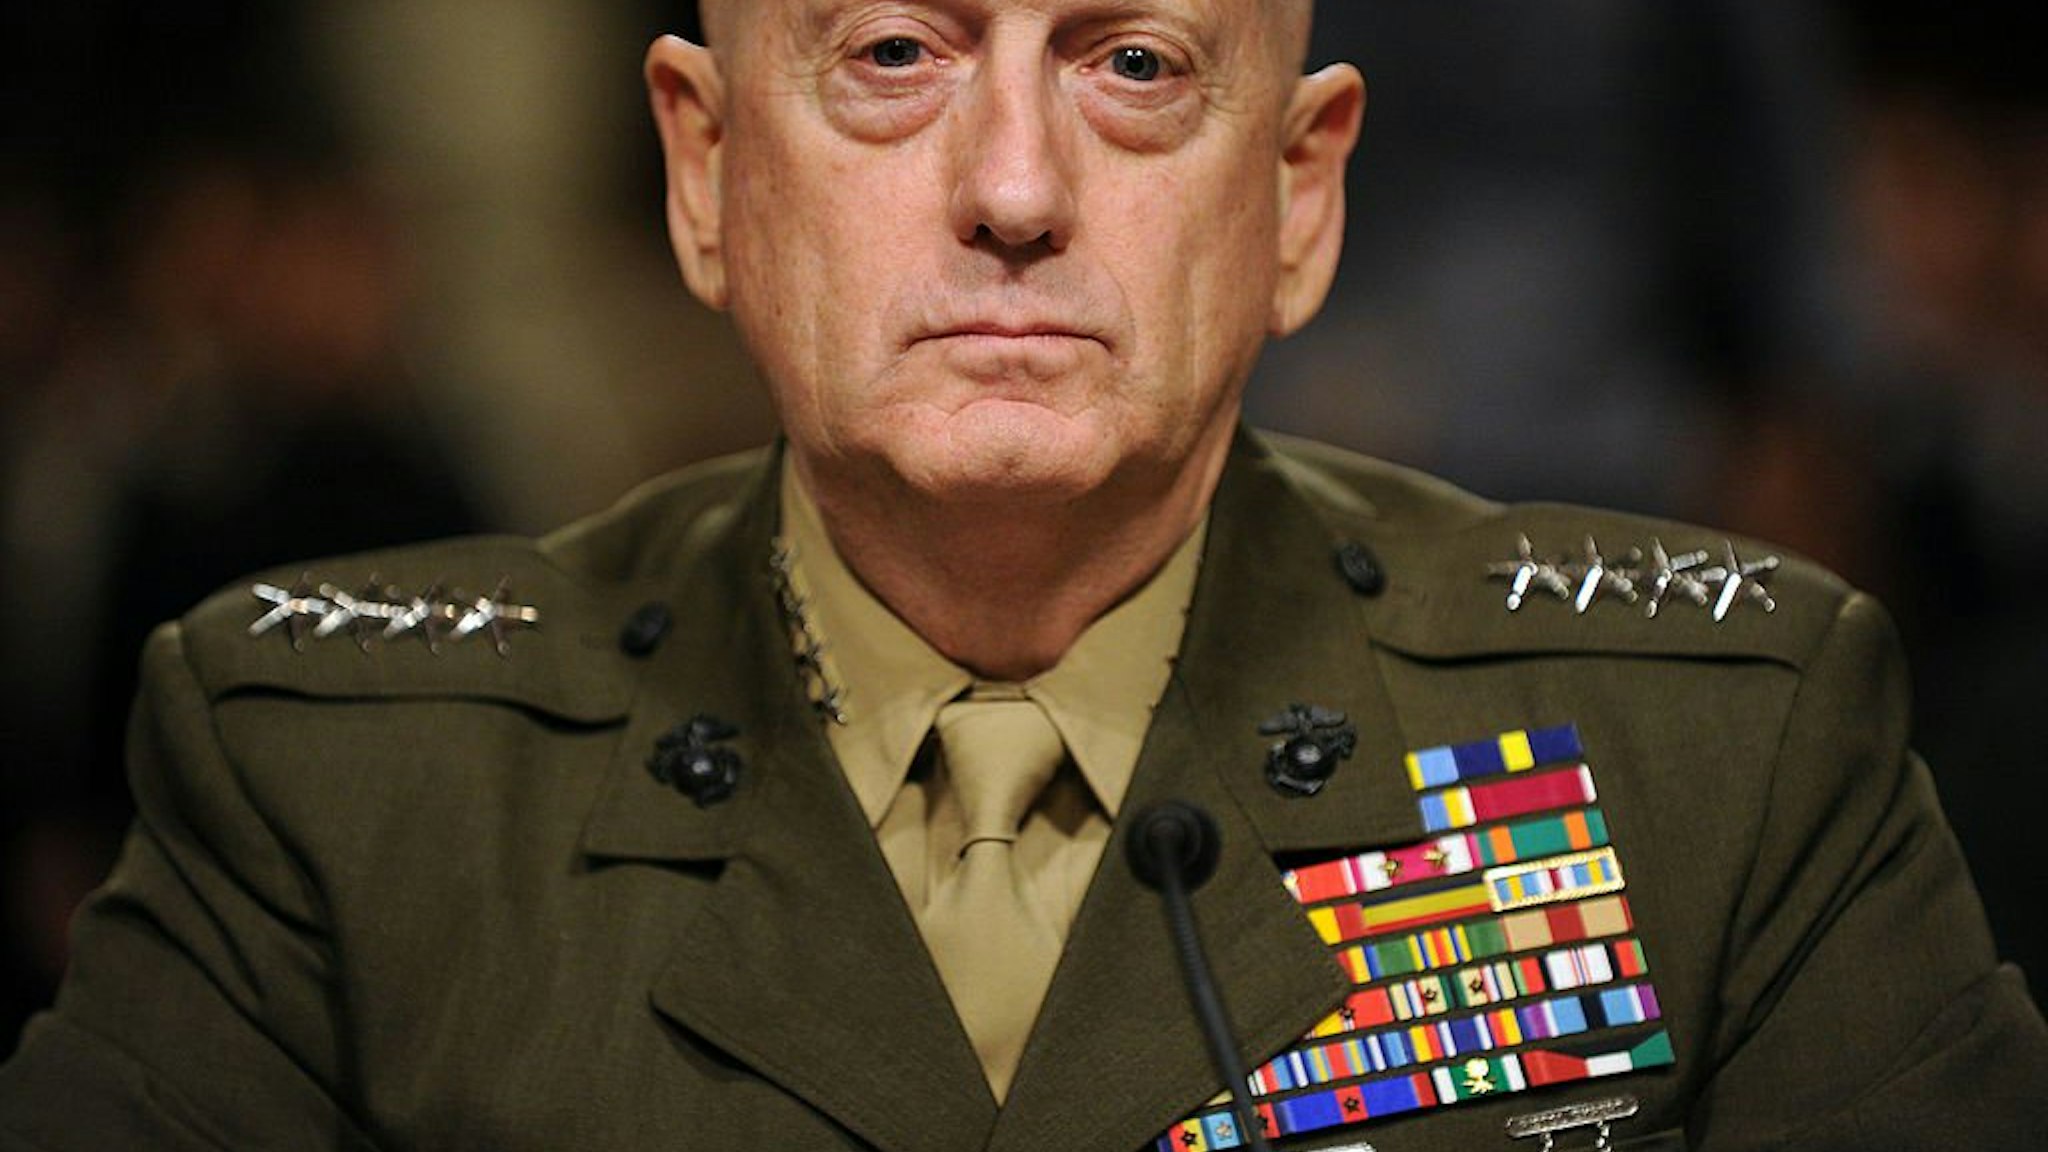 US Marine Corps General James Mattis waits to testify before the Senate Armed Service Committee for his reappointment to the grade of general and to be commander of the United States Central Command or CENTCOM on July 27, 2010 on Capitol Hill in Washingto